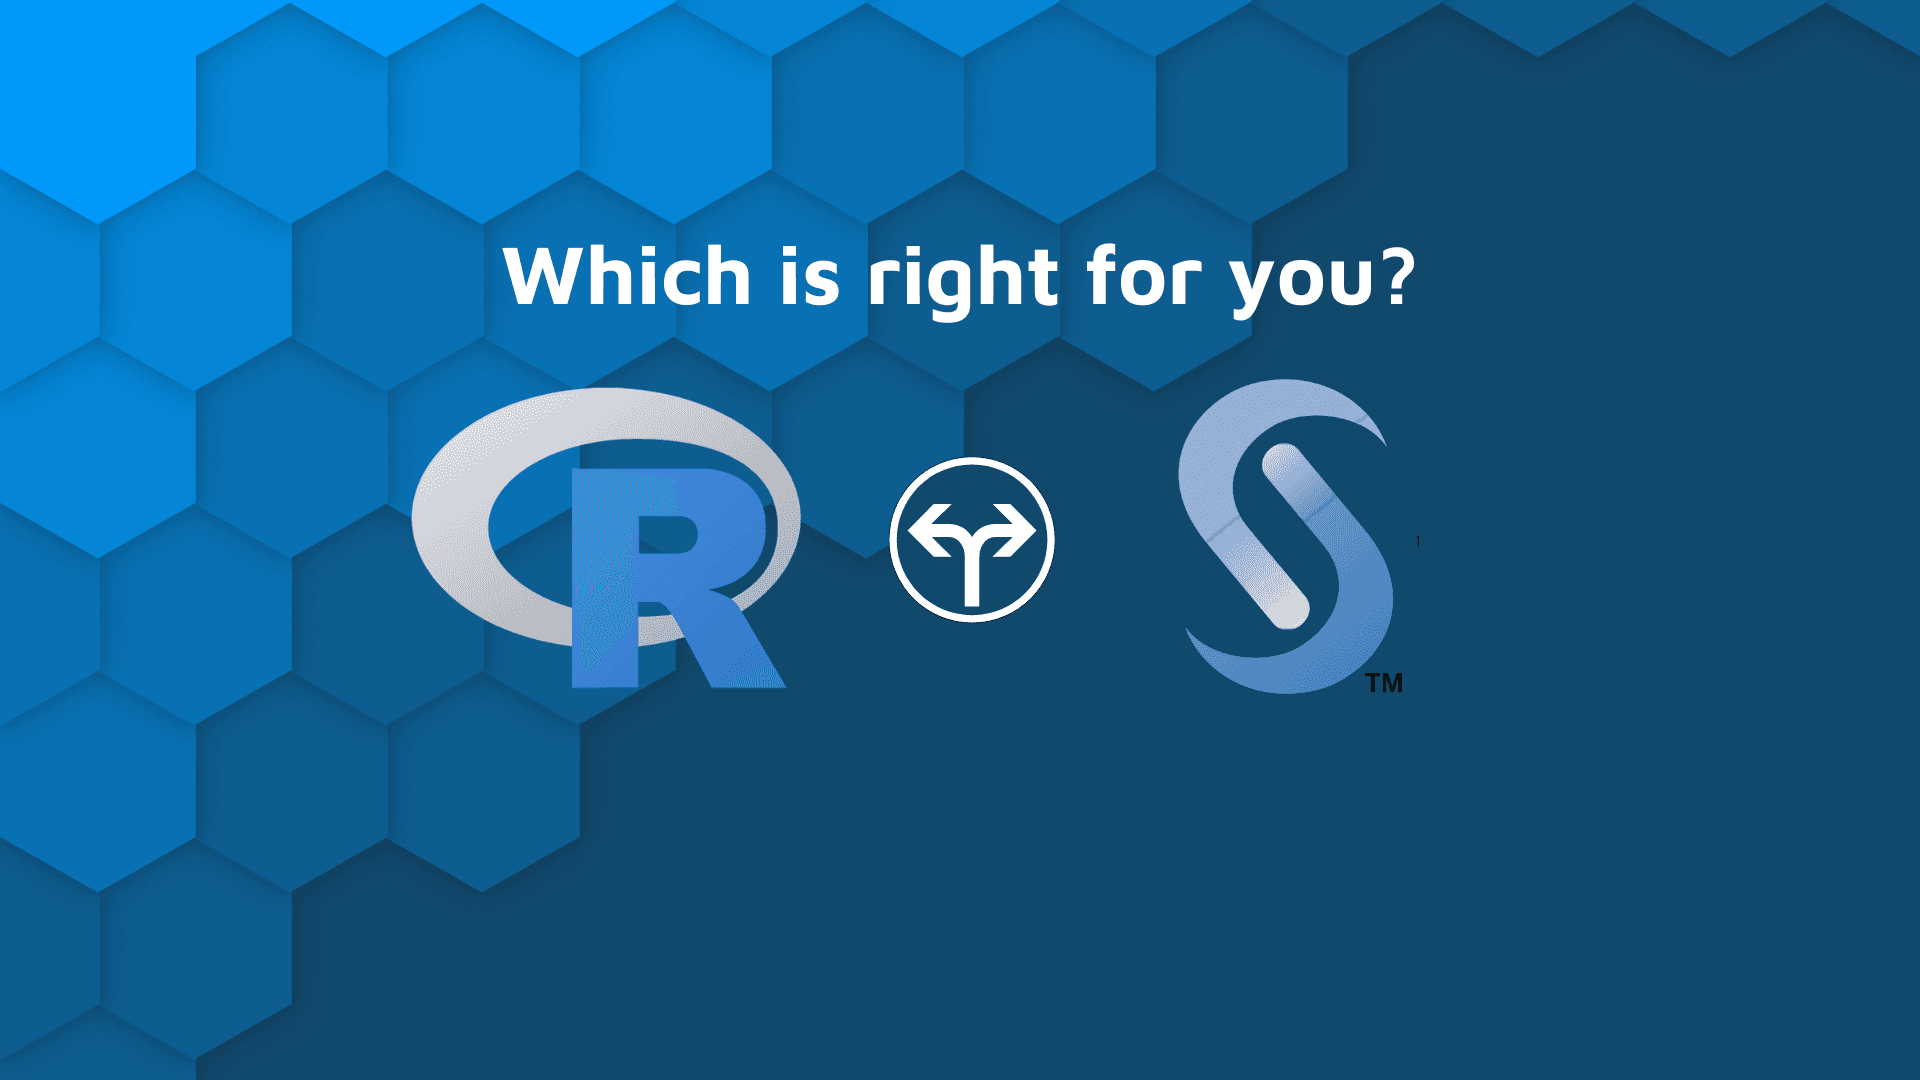 SAS vs R programming blog hex banner with white text, "Which is right for you?" and the logos for R and SAS